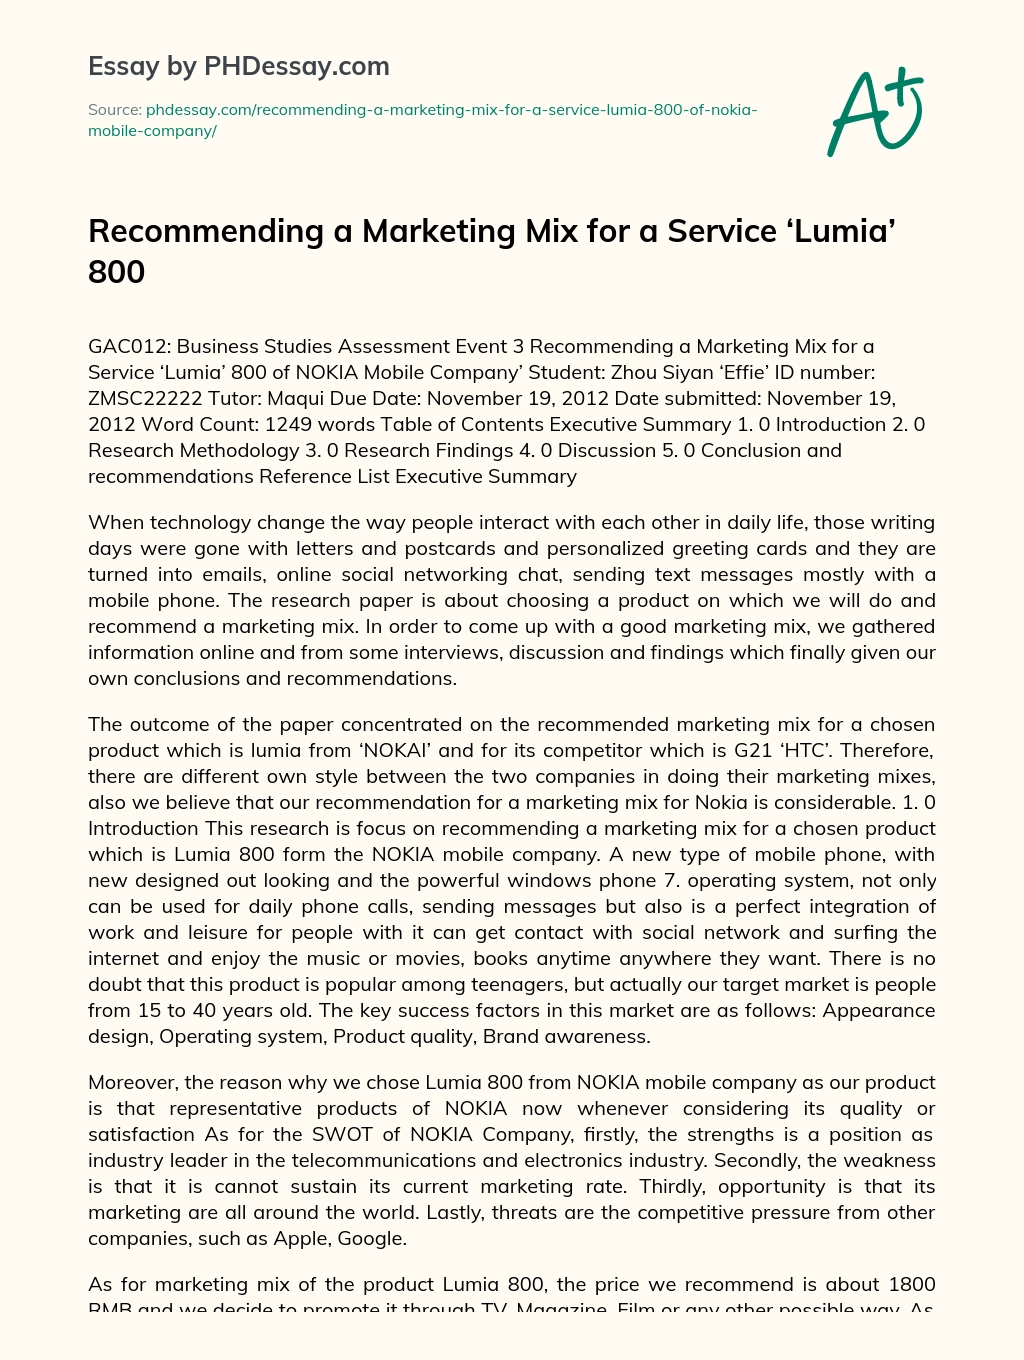 Recommending a Marketing Mix for a Service ‘Lumia’ 800 essay